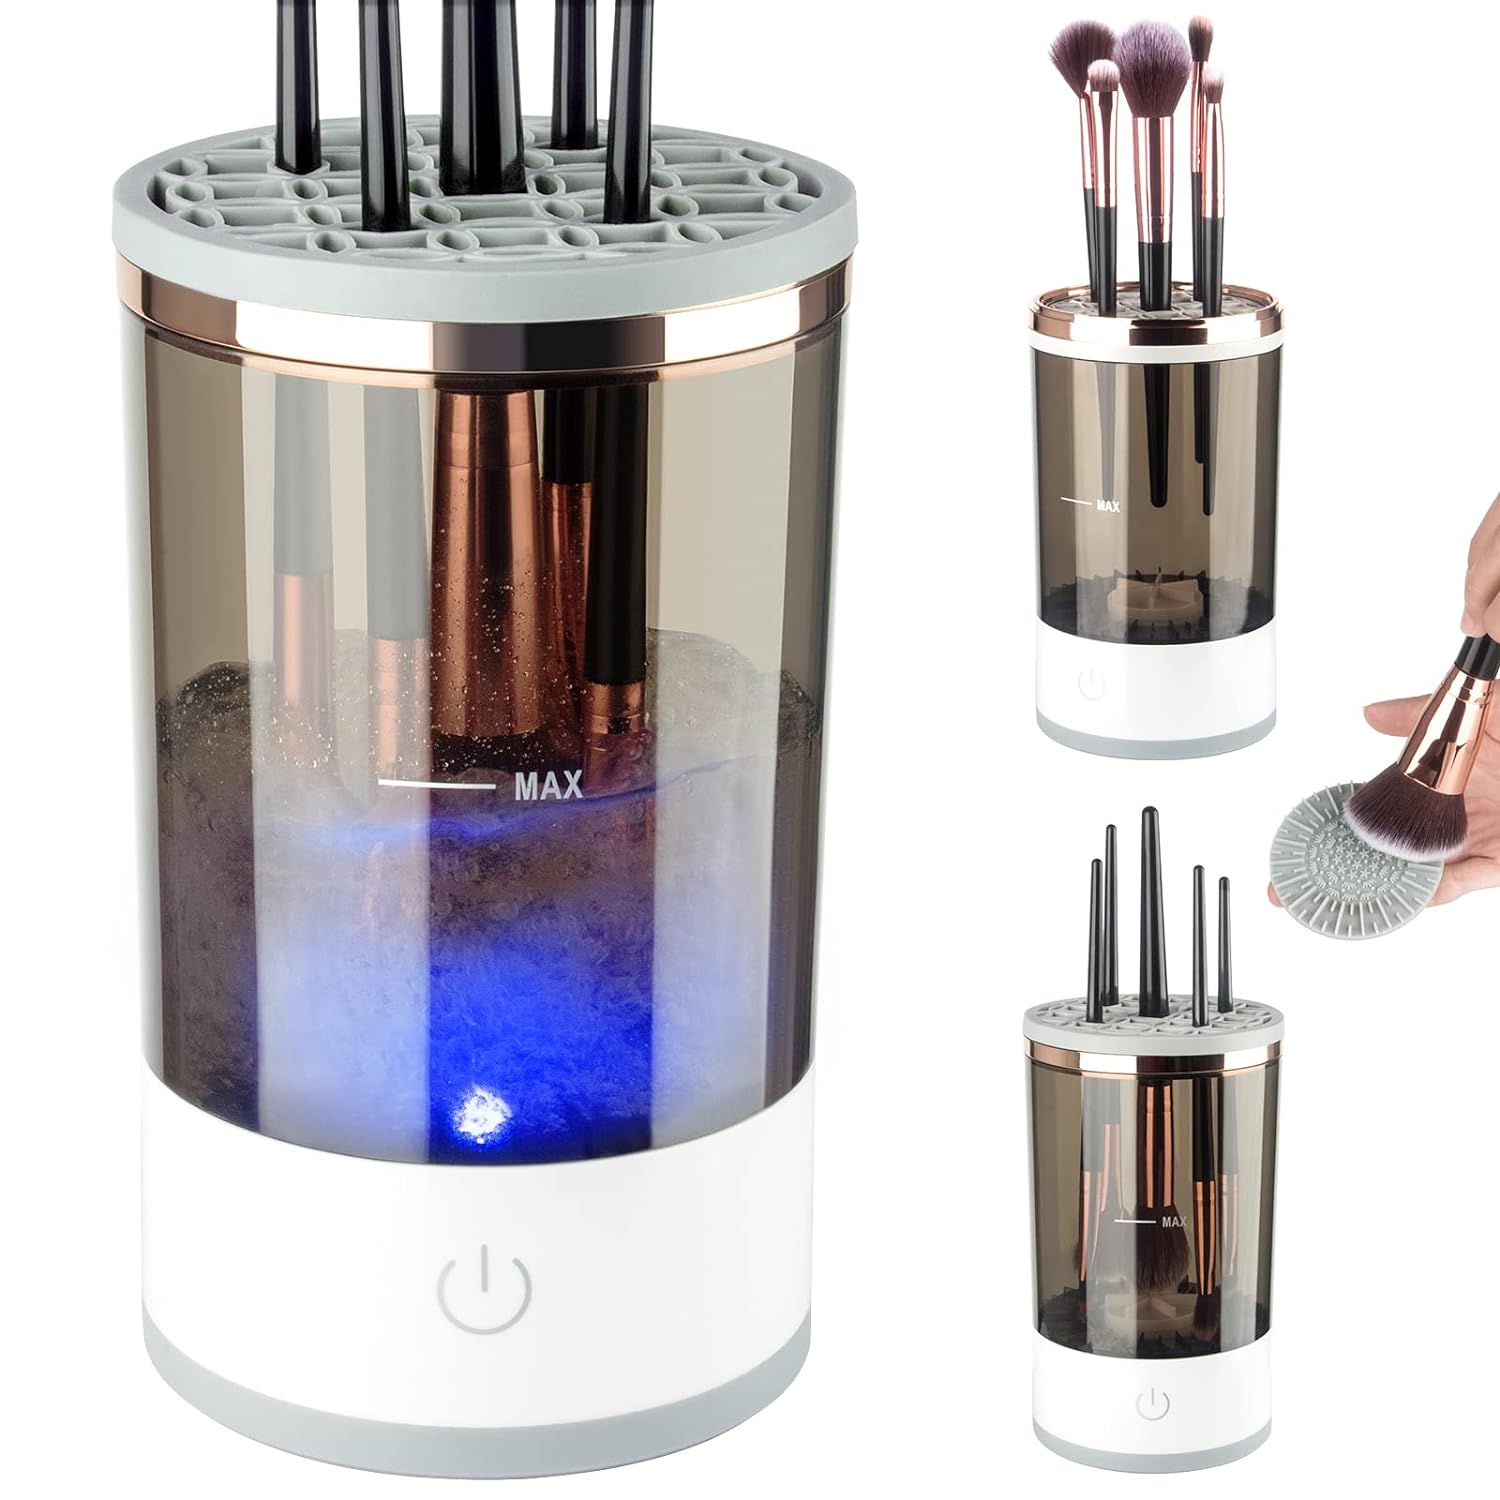 Best Electric Makeup Brush Cleaner on Amazon